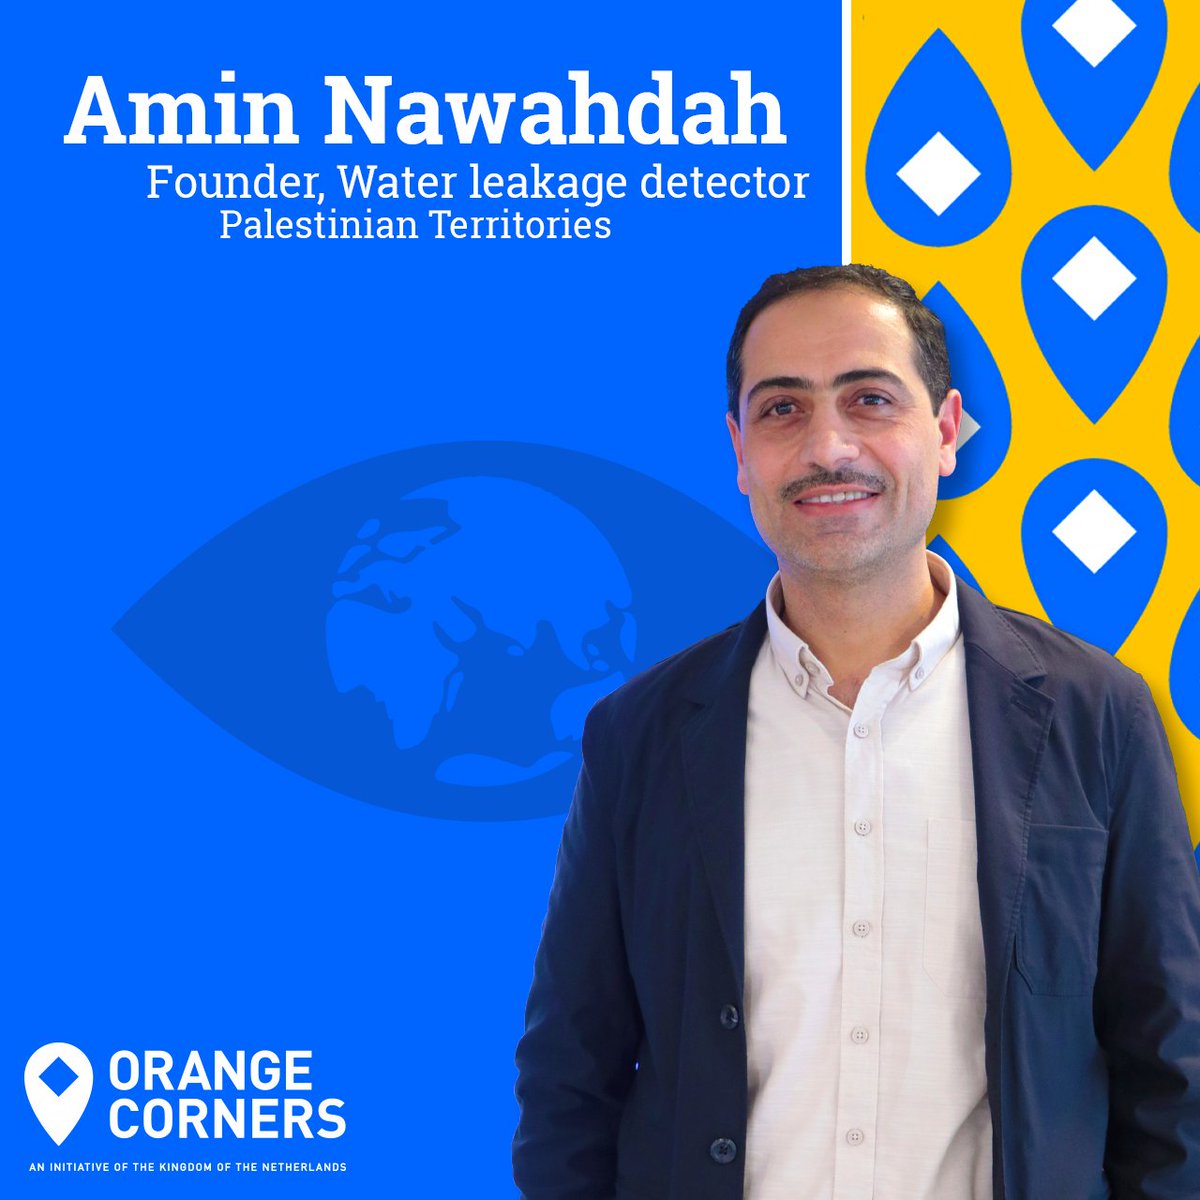 Up to 1/3 of water used in #Palestinian homes is wasted, says #OrangeCorners #entrepreneur Amin Nawahdah. His solution? An #IoT-based #water leakage detector which provides real-time flow #data. This helps Palestinian households manage #waterconsumption & discover leakages early!